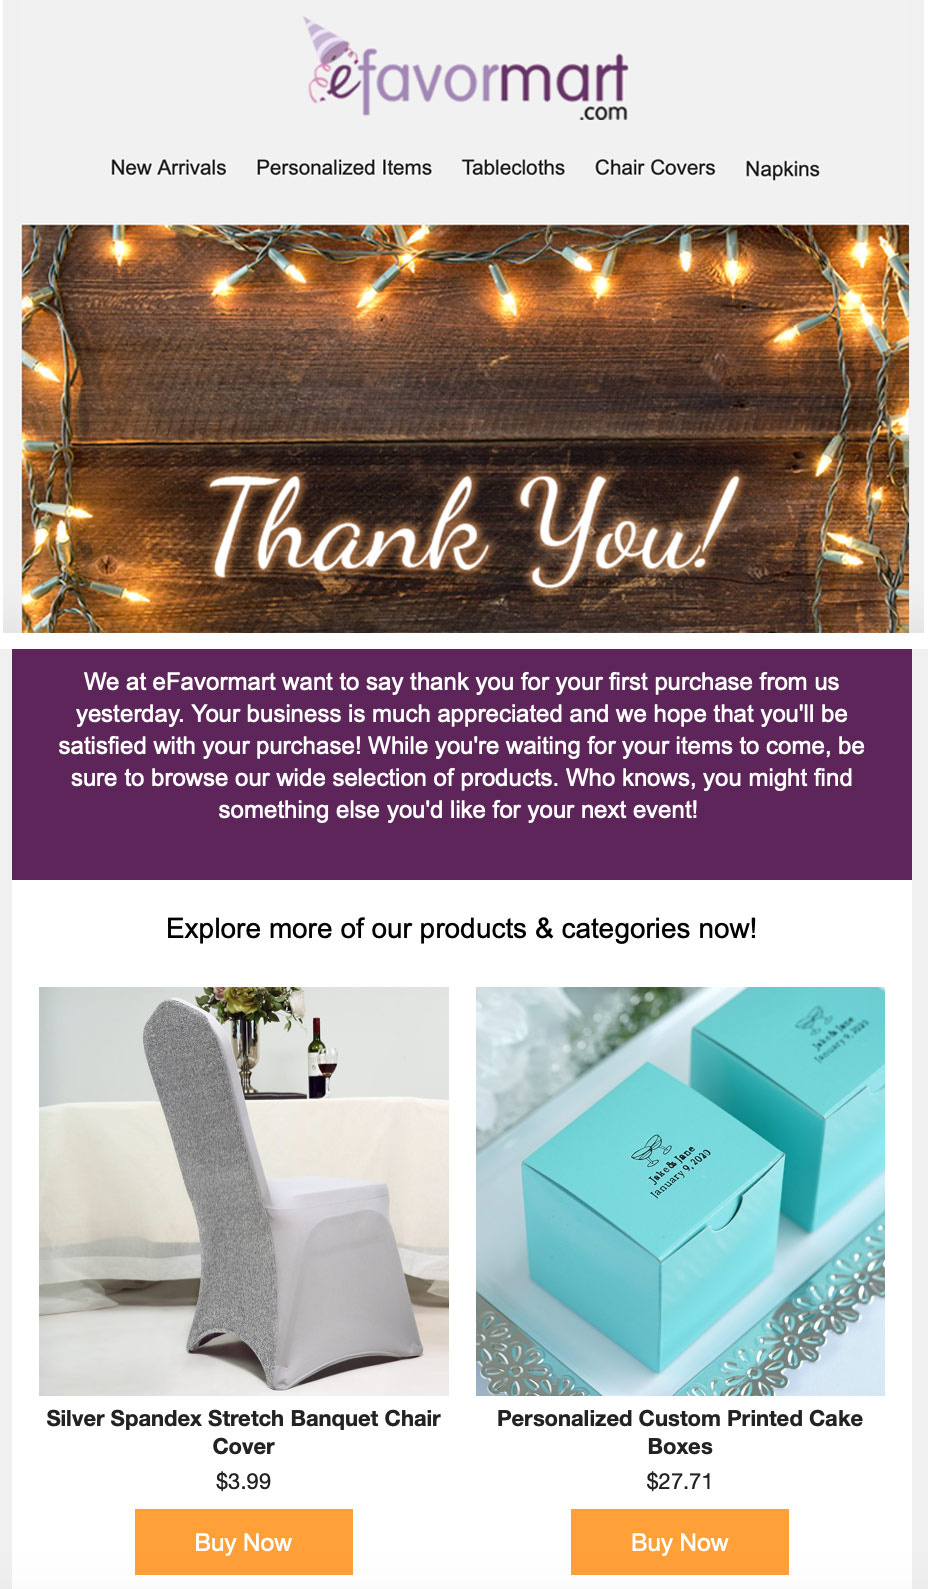 Efavormart's post-purchase email thanks the customer and includes links to relevant content.